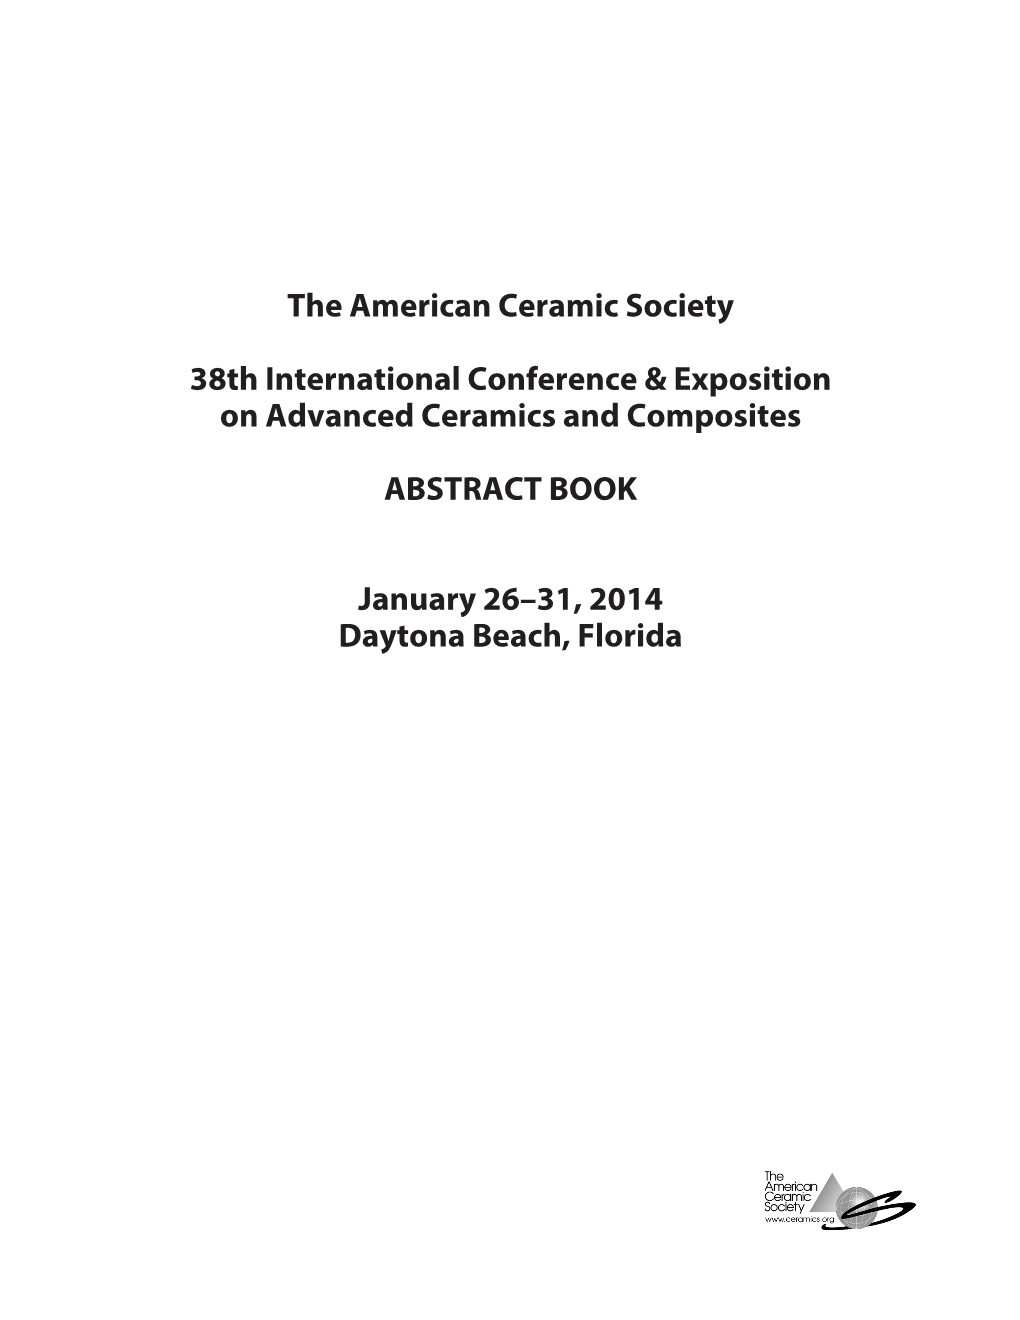 The American Ceramic Society 38Th International Conference